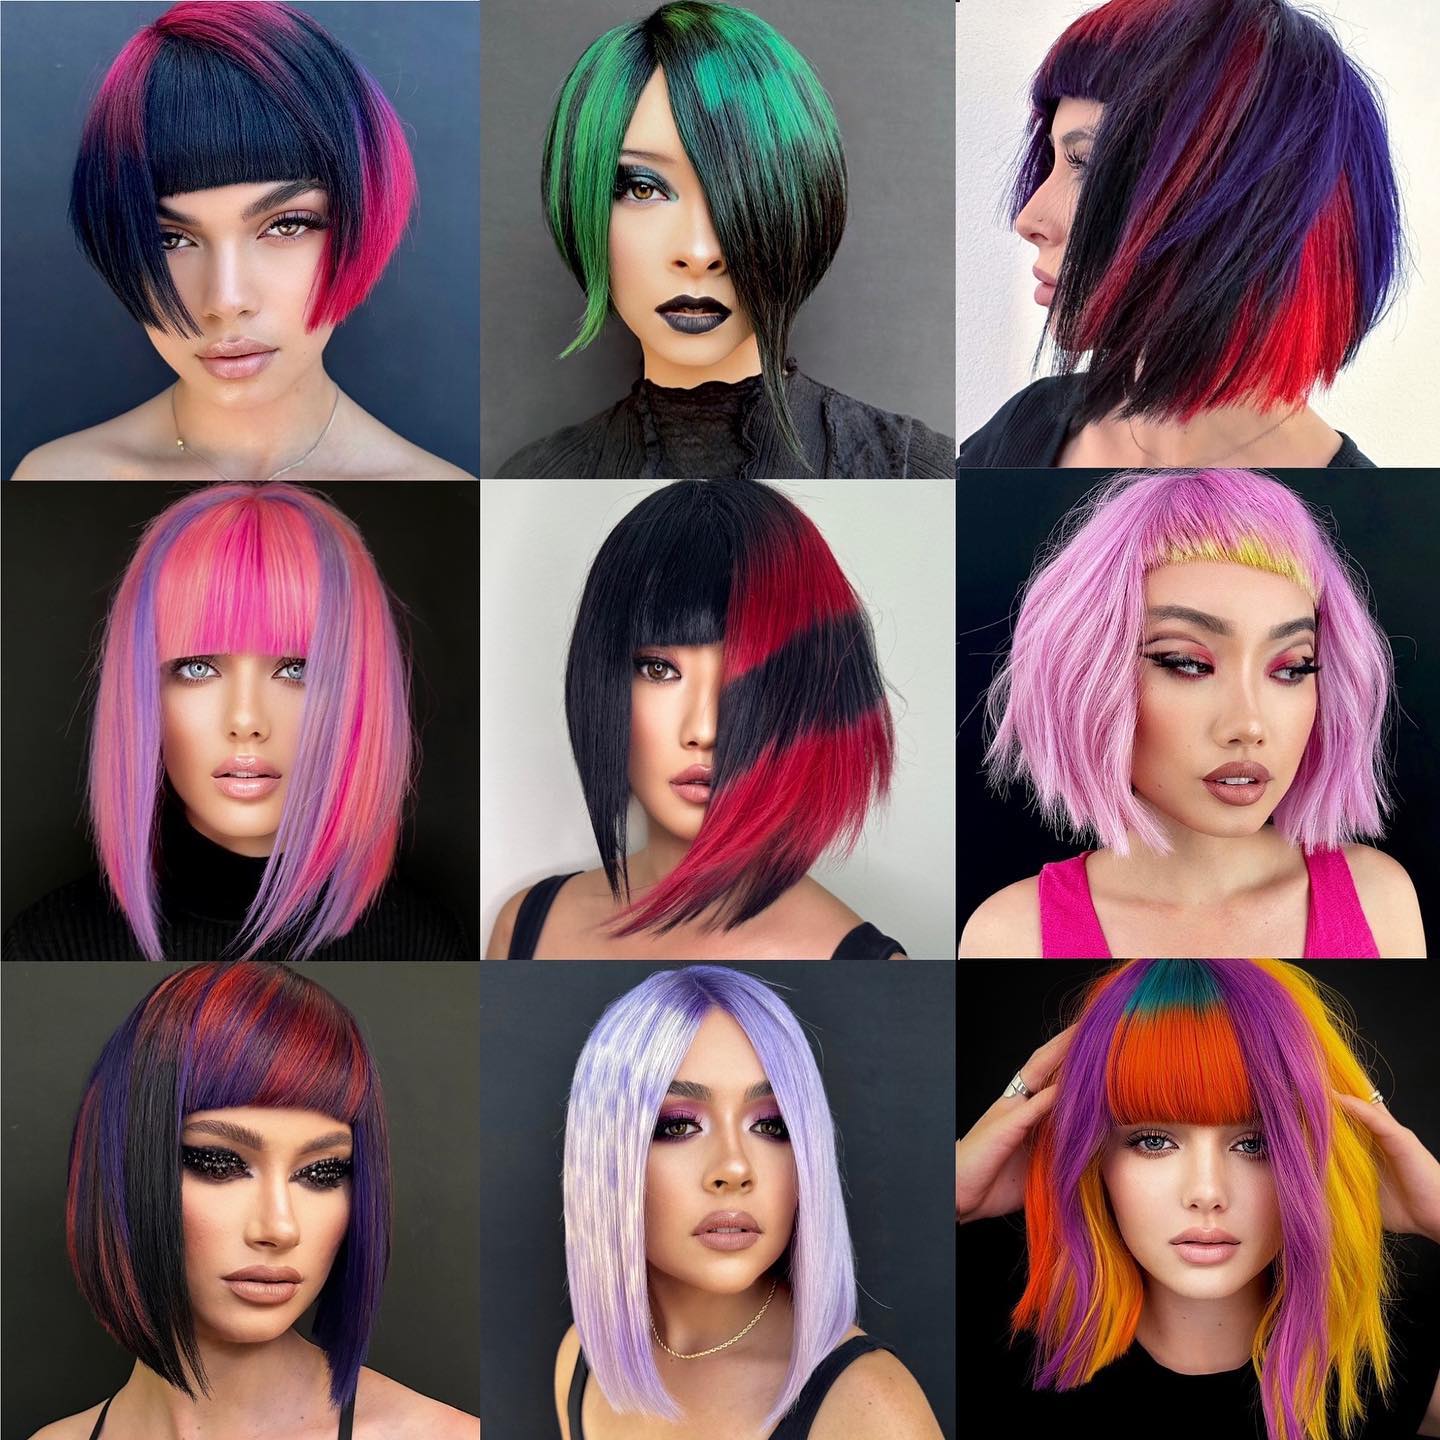 100+ Best Colorful Hair Ideas images 22